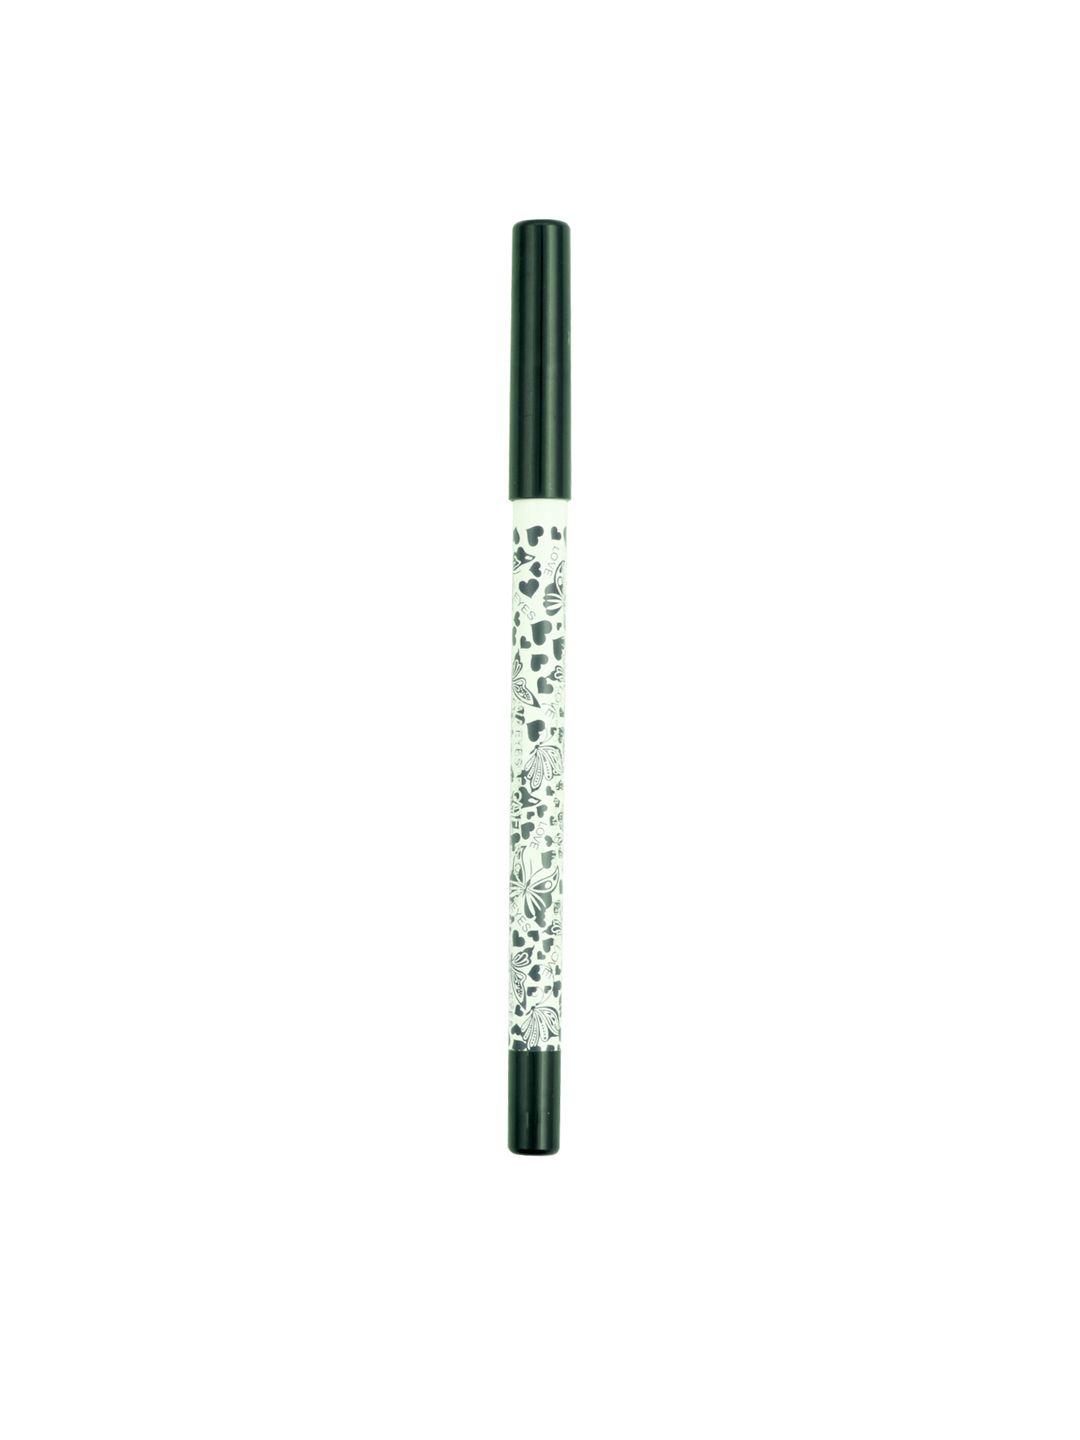 Daily Life Forever52 Green Waterproof Smoothening Eye Pencil 1.2g Price in India